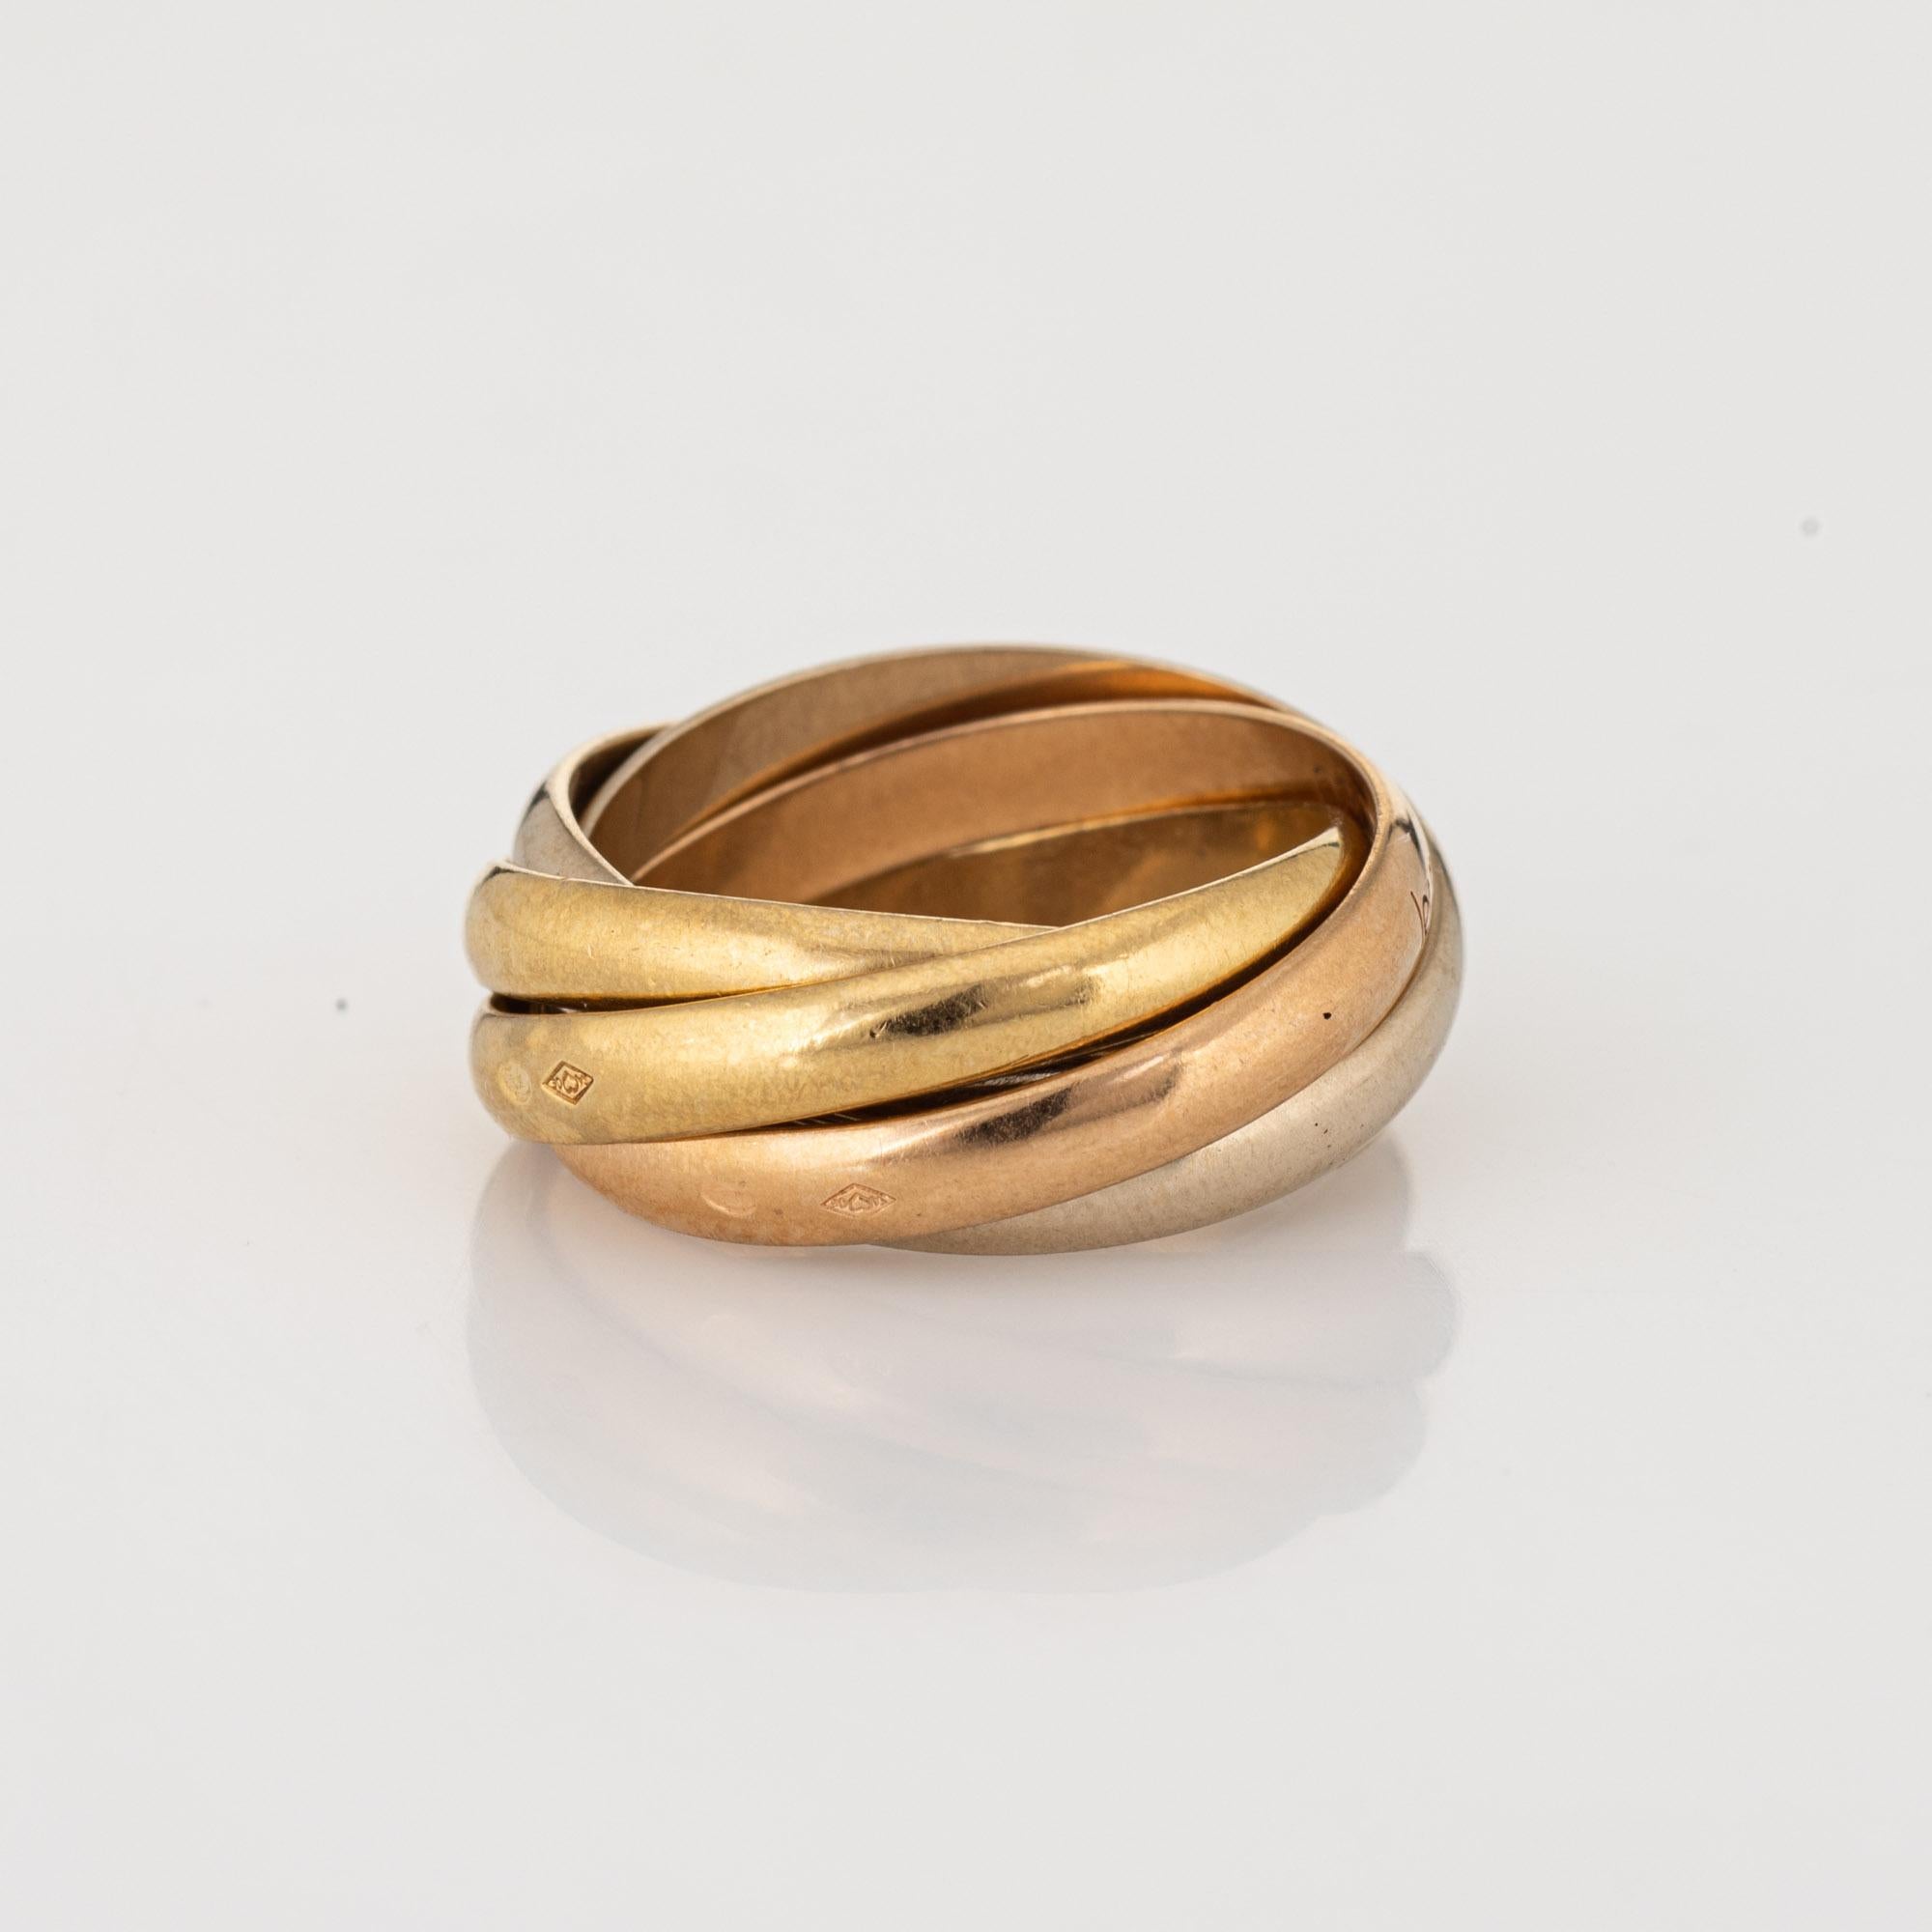 Vintage les Must de Cartier 5 band Trinity ring crafted in 18k yellow, white & rose gold (circa 1980s).  

The Cartier ring features 5 bands of 18k rose, yellow & white gold. Each band measures 3mm wide. The ring is great worn alone or layered with